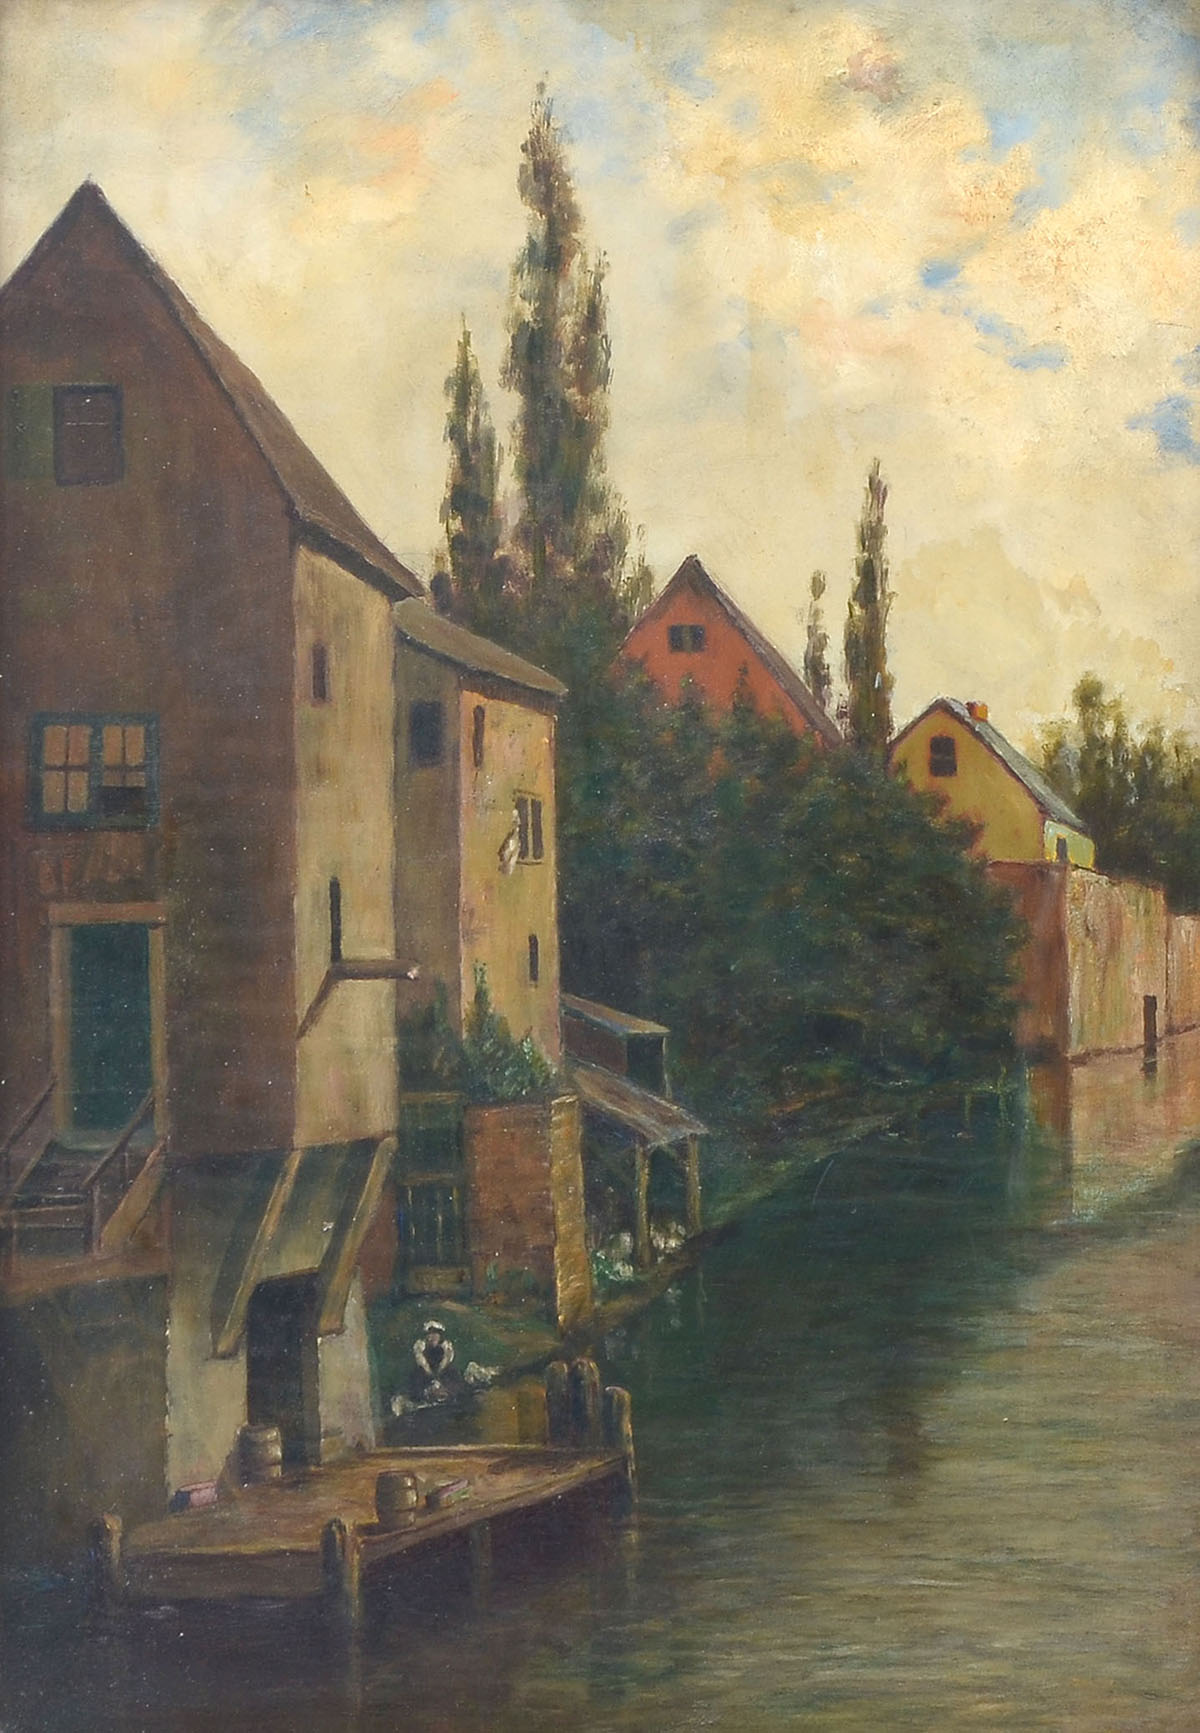 EUROPEAN CANAL PAINTING NEWCOMB